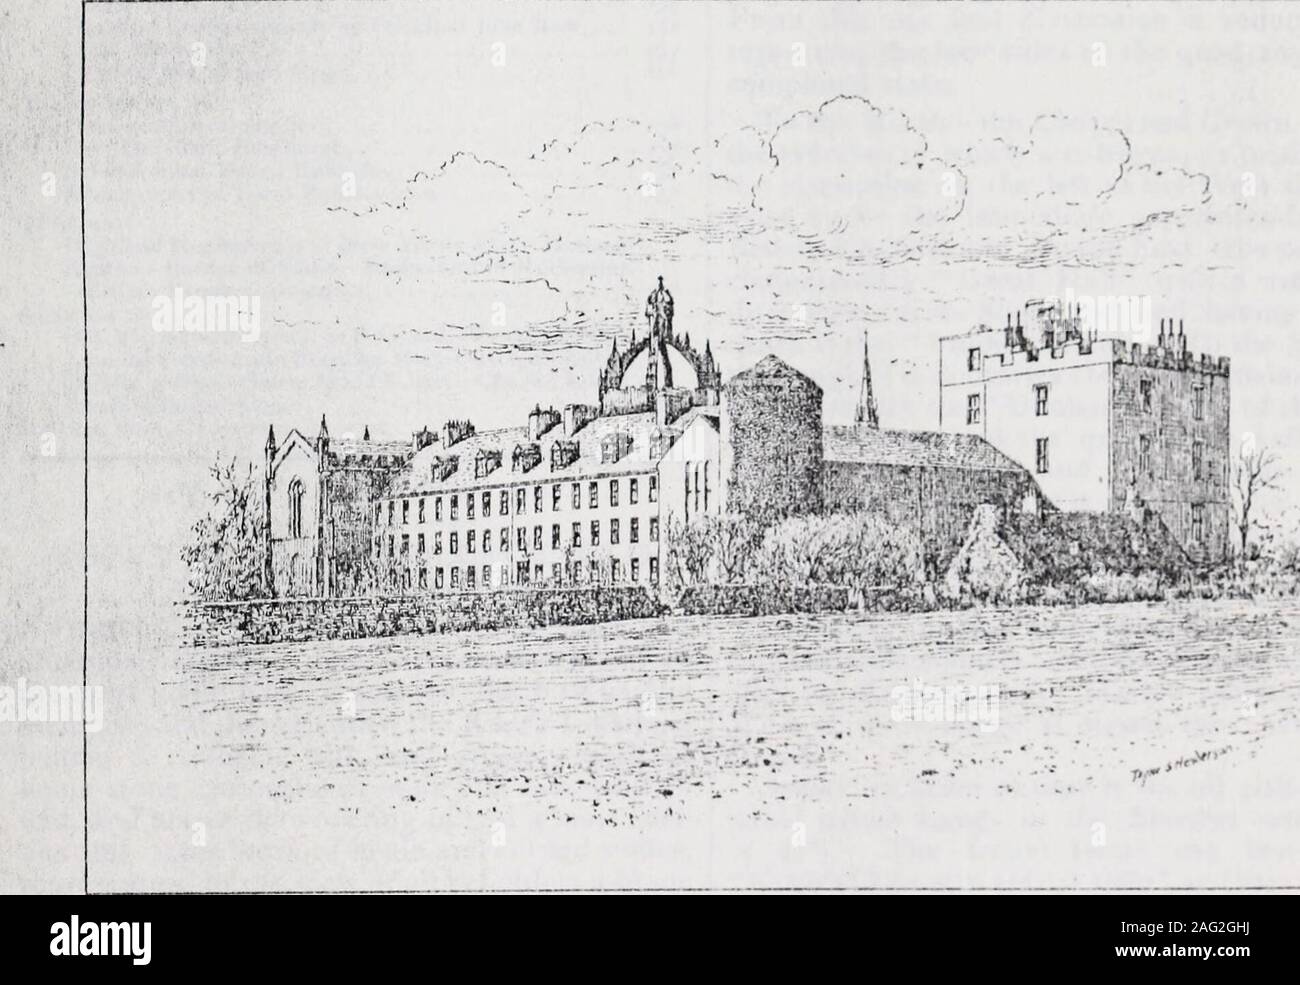 . Scottish notes and queries. KINGS COLLEGE circa 1660.Looking Towards Bishop Dunbars Dormitories. (From Parson Got Jons A fa/ of Aberdeen). Scottish Notes and Queries.. KINGS COLLEGE CIRCA 1860.Looking Towards Dr. Frasers Dormitories. {From a Photograph by G, W, Wilton &* Co.) Supplement, March, 1895. SCOTTISH NOTES AND QUERIES Vol. VIII.] No. 10. MARCH, 1895. RBS7 Bibliography of Local Publications, 157 Queries:— Highland Regiments and New Years Day Home olKenton—Burnet of Seton—Rutheiford or Rutherfurd -British Farmers Magazine, 157 Ar.swi-Ns:- Old Rhyme -Alderman in Scotland- Parody of Son Stock Photo